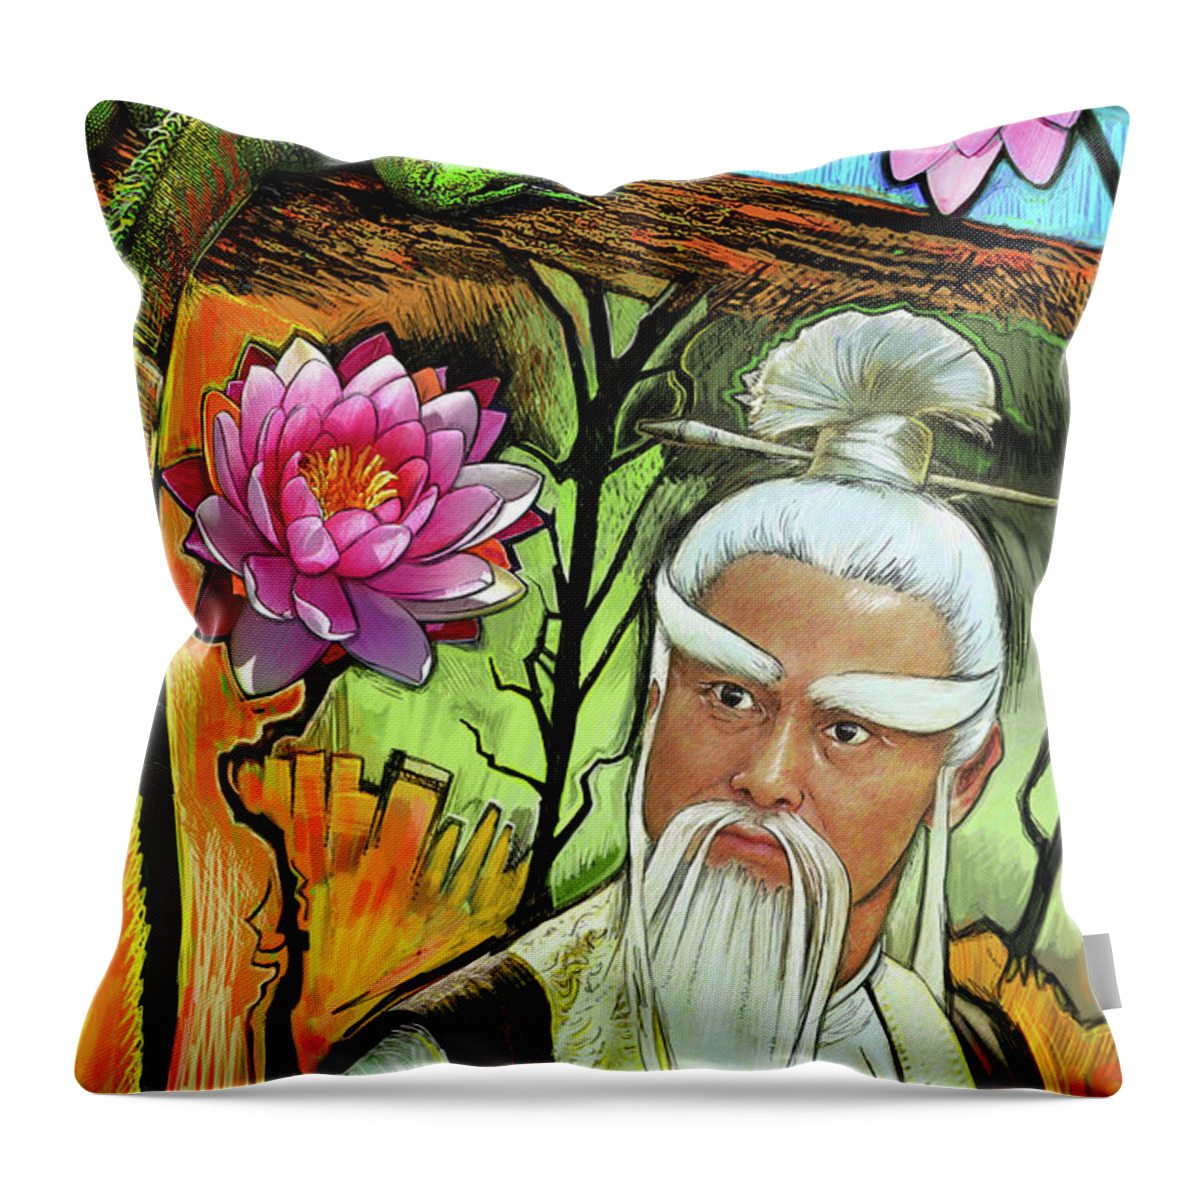 Samurai Throw Pillow featuring the painting The Hairy Eight by Yom Tov Blumenthal